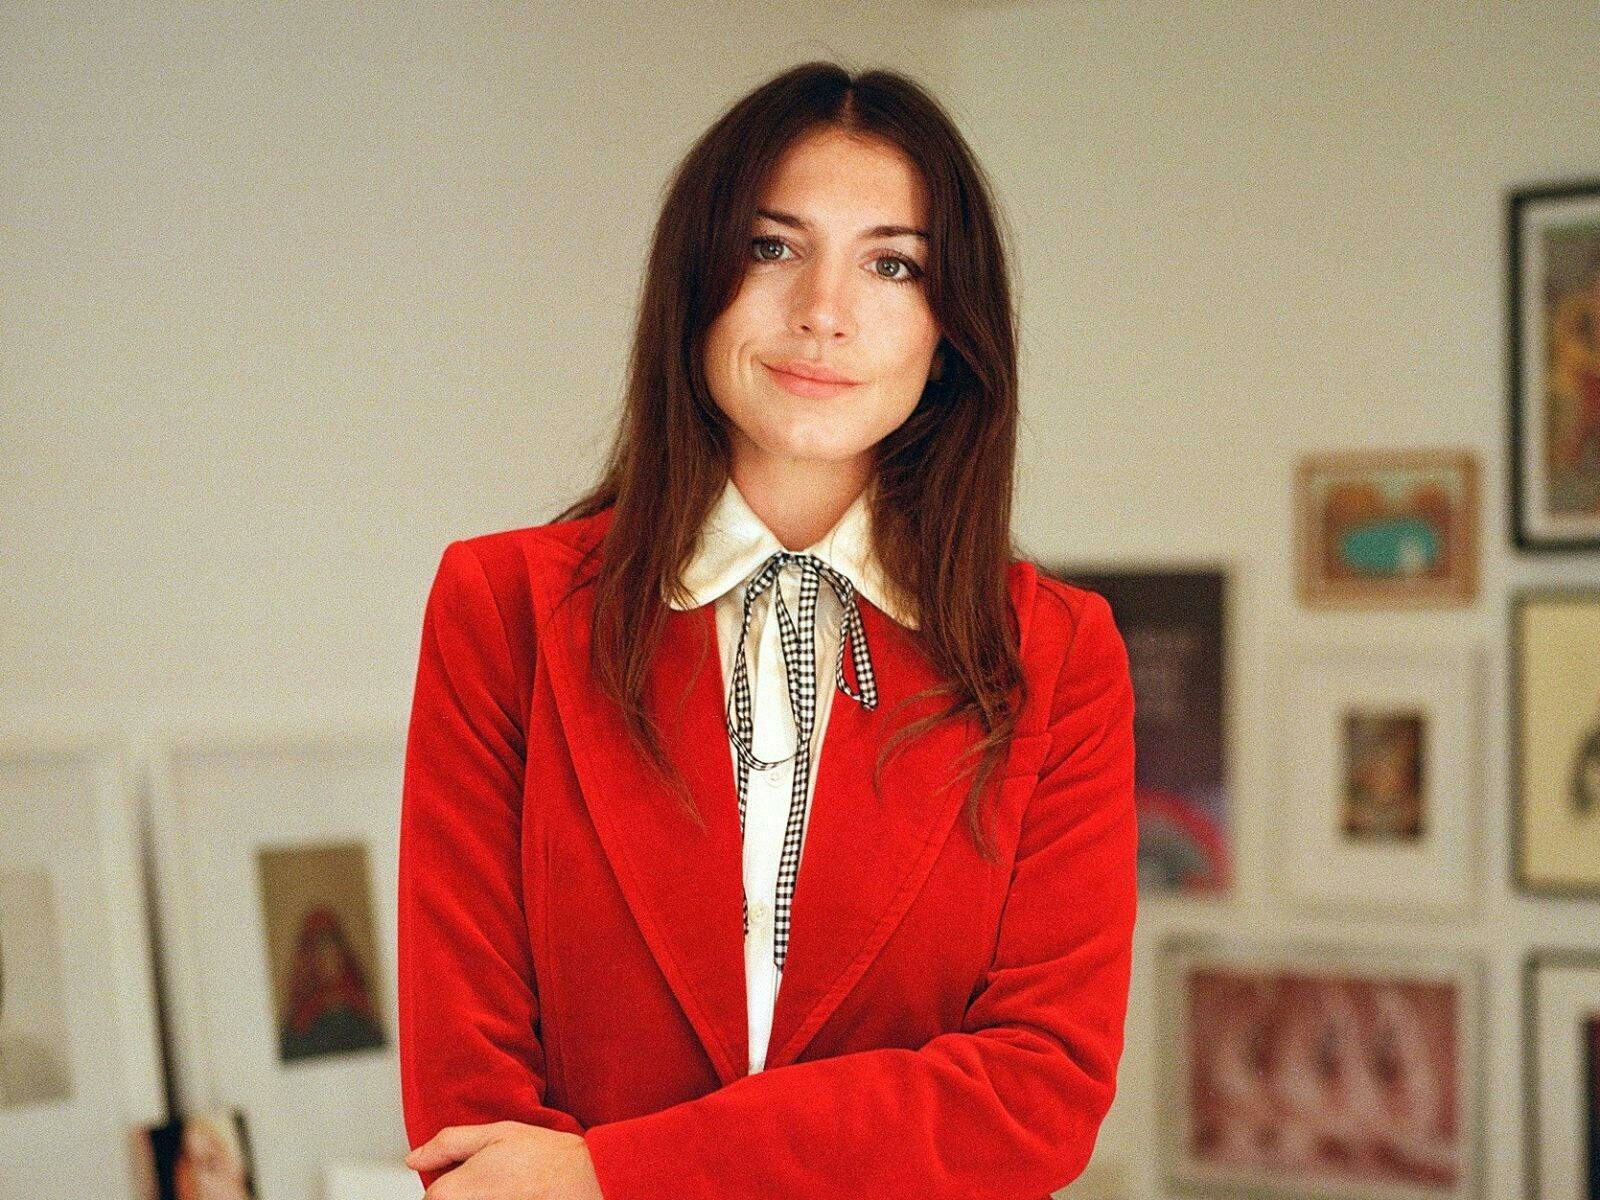 Katy Hessel stands in front of a white wall with several paintings behind her wearing a red suit